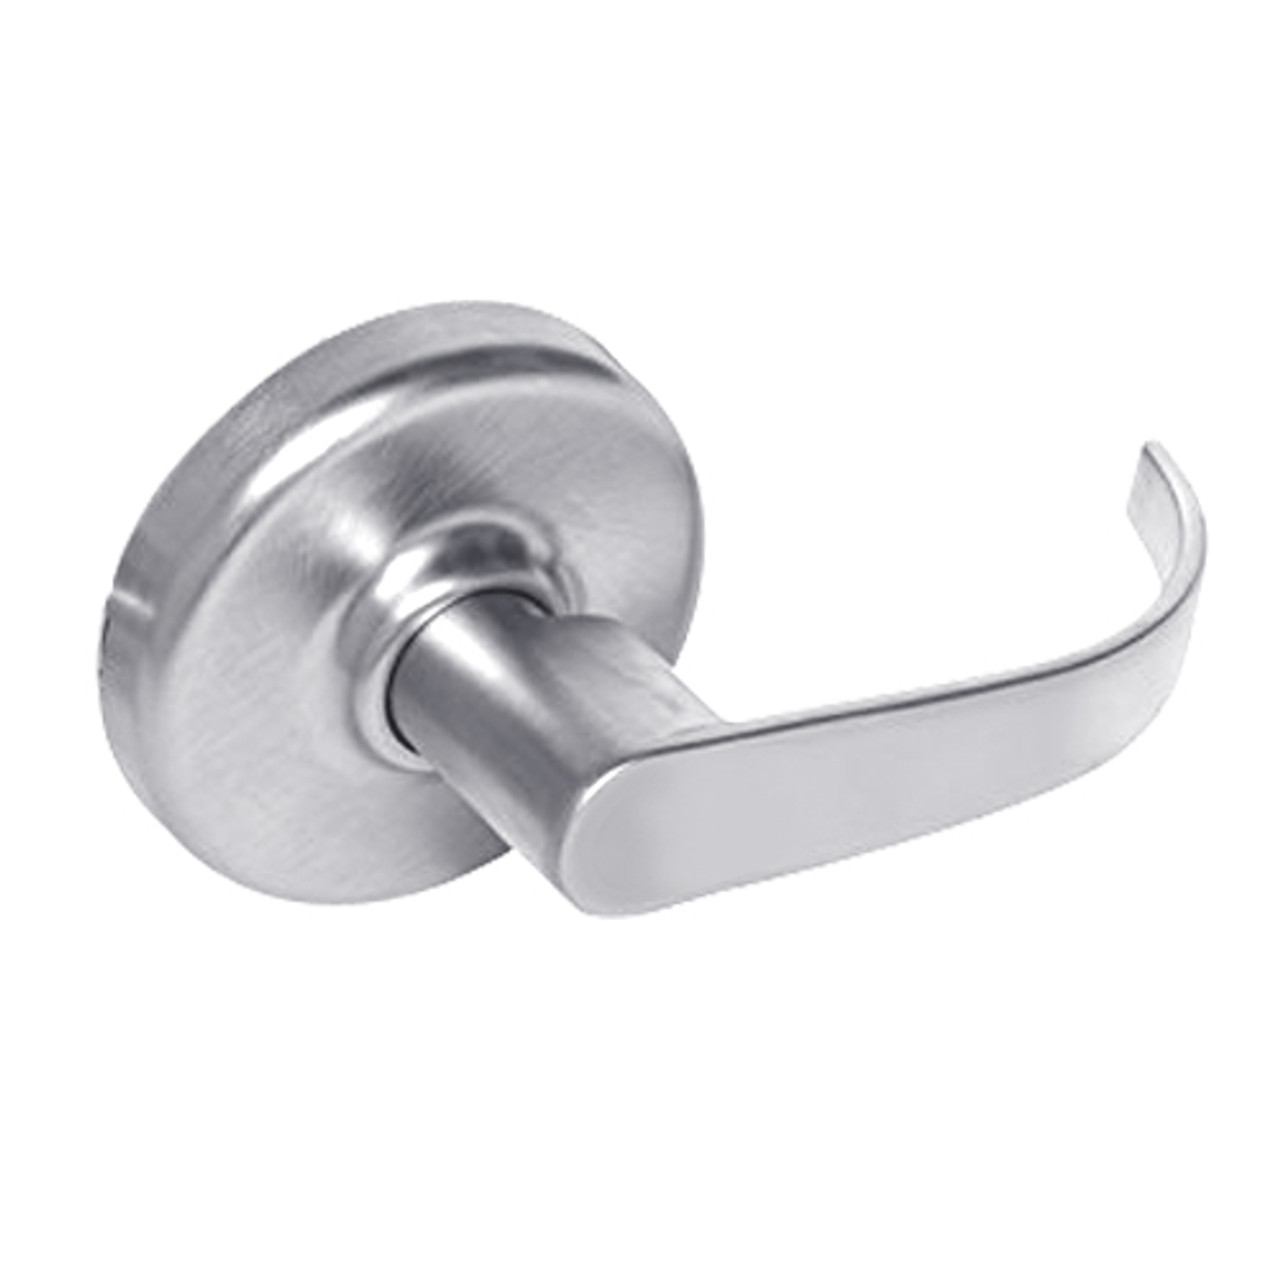 CL3350-PZD-625 Corbin CL3300 Series Extra Heavy Duty Half Dummy Cylindrical Locksets with Princeton Lever in Bright Chrome Finish